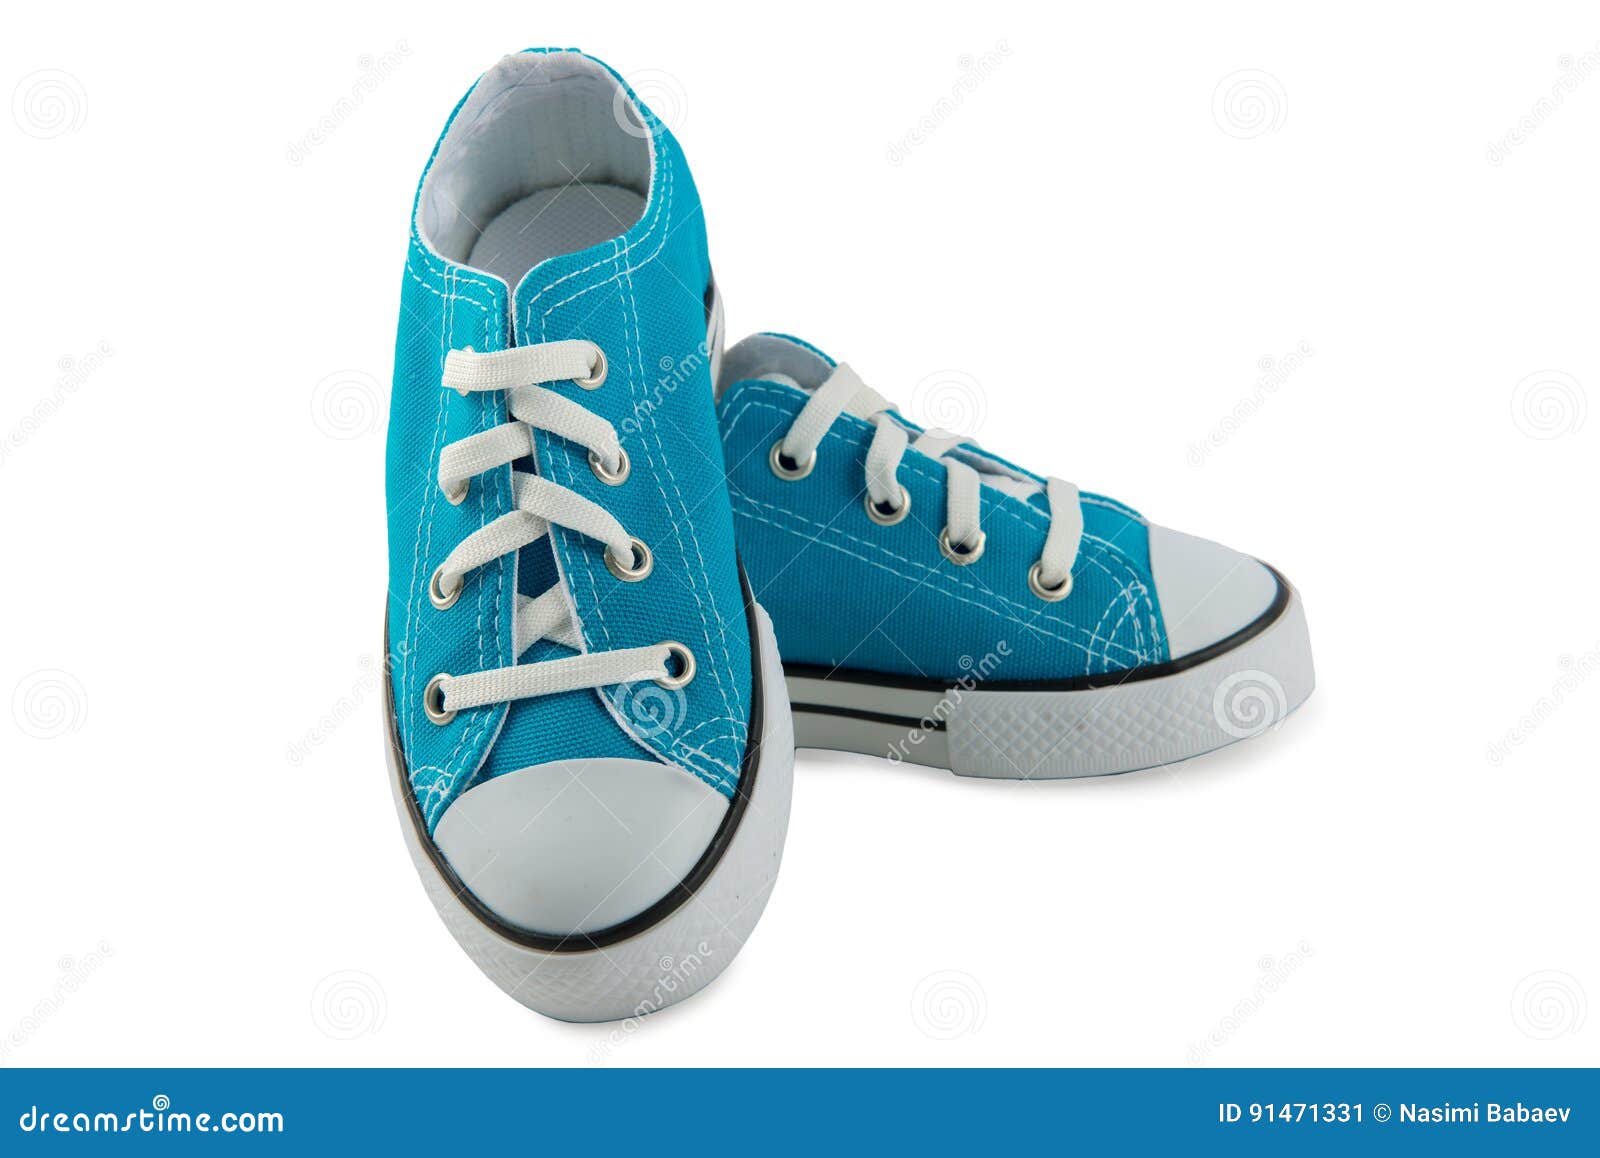 Children`s Sneakers Isolated on a White Background Stock Image - Image ...